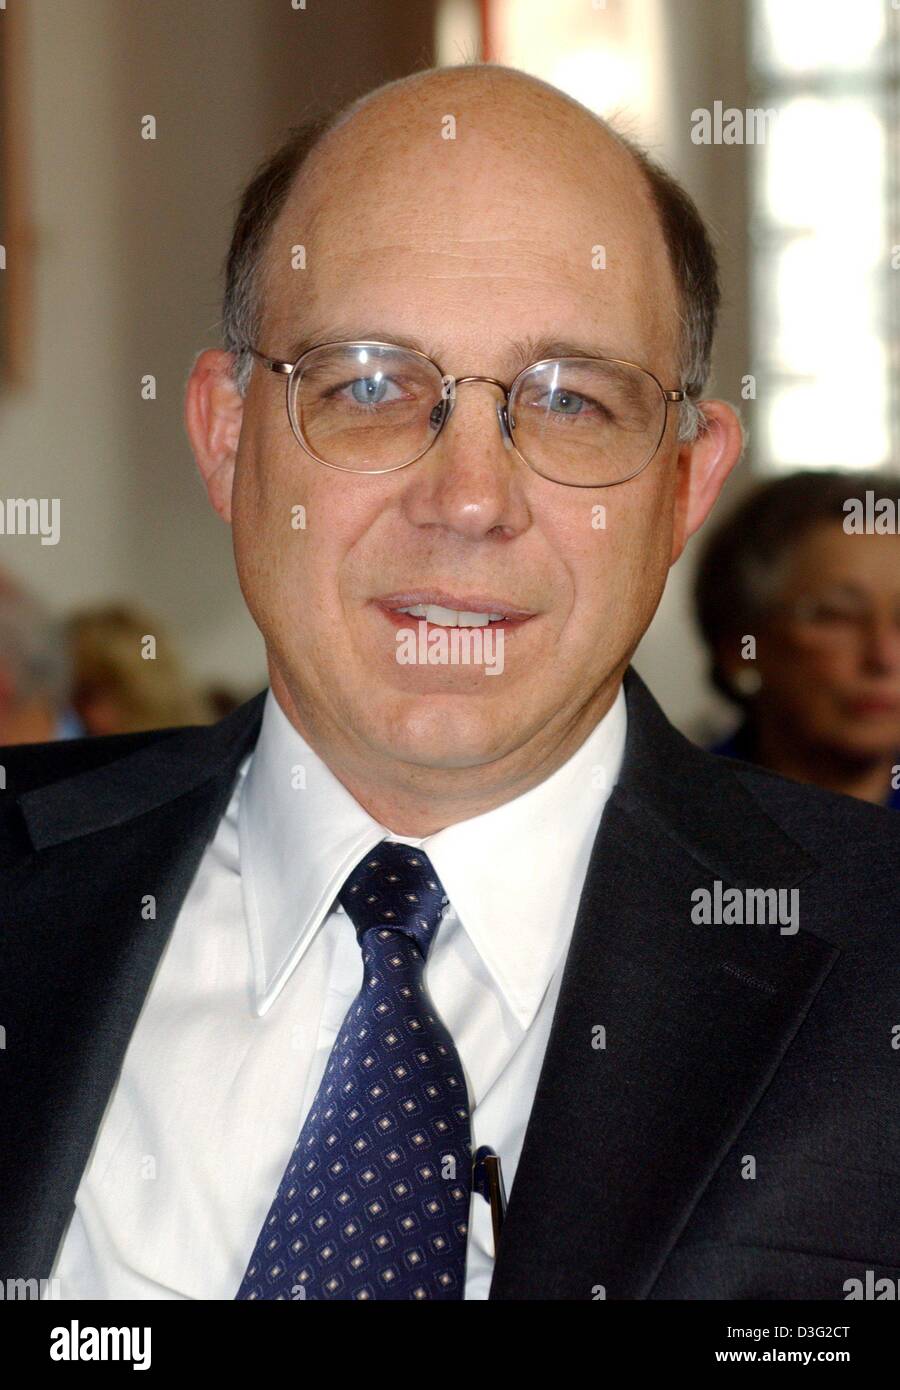 (dpa) - US immunologist Peter G. Schultz smiles during the award ceremony in Frankfurt, 14 March 2003. He is one of the two laureates of this year's Paul Ehrlich- and Ludwig Darmstaedter-Prize. Together with his colleague he was honoured with the prize for their discovery of so-called catalytic antibodies, a field that takes as its principle goal an understanding of how the binding Stock Photo